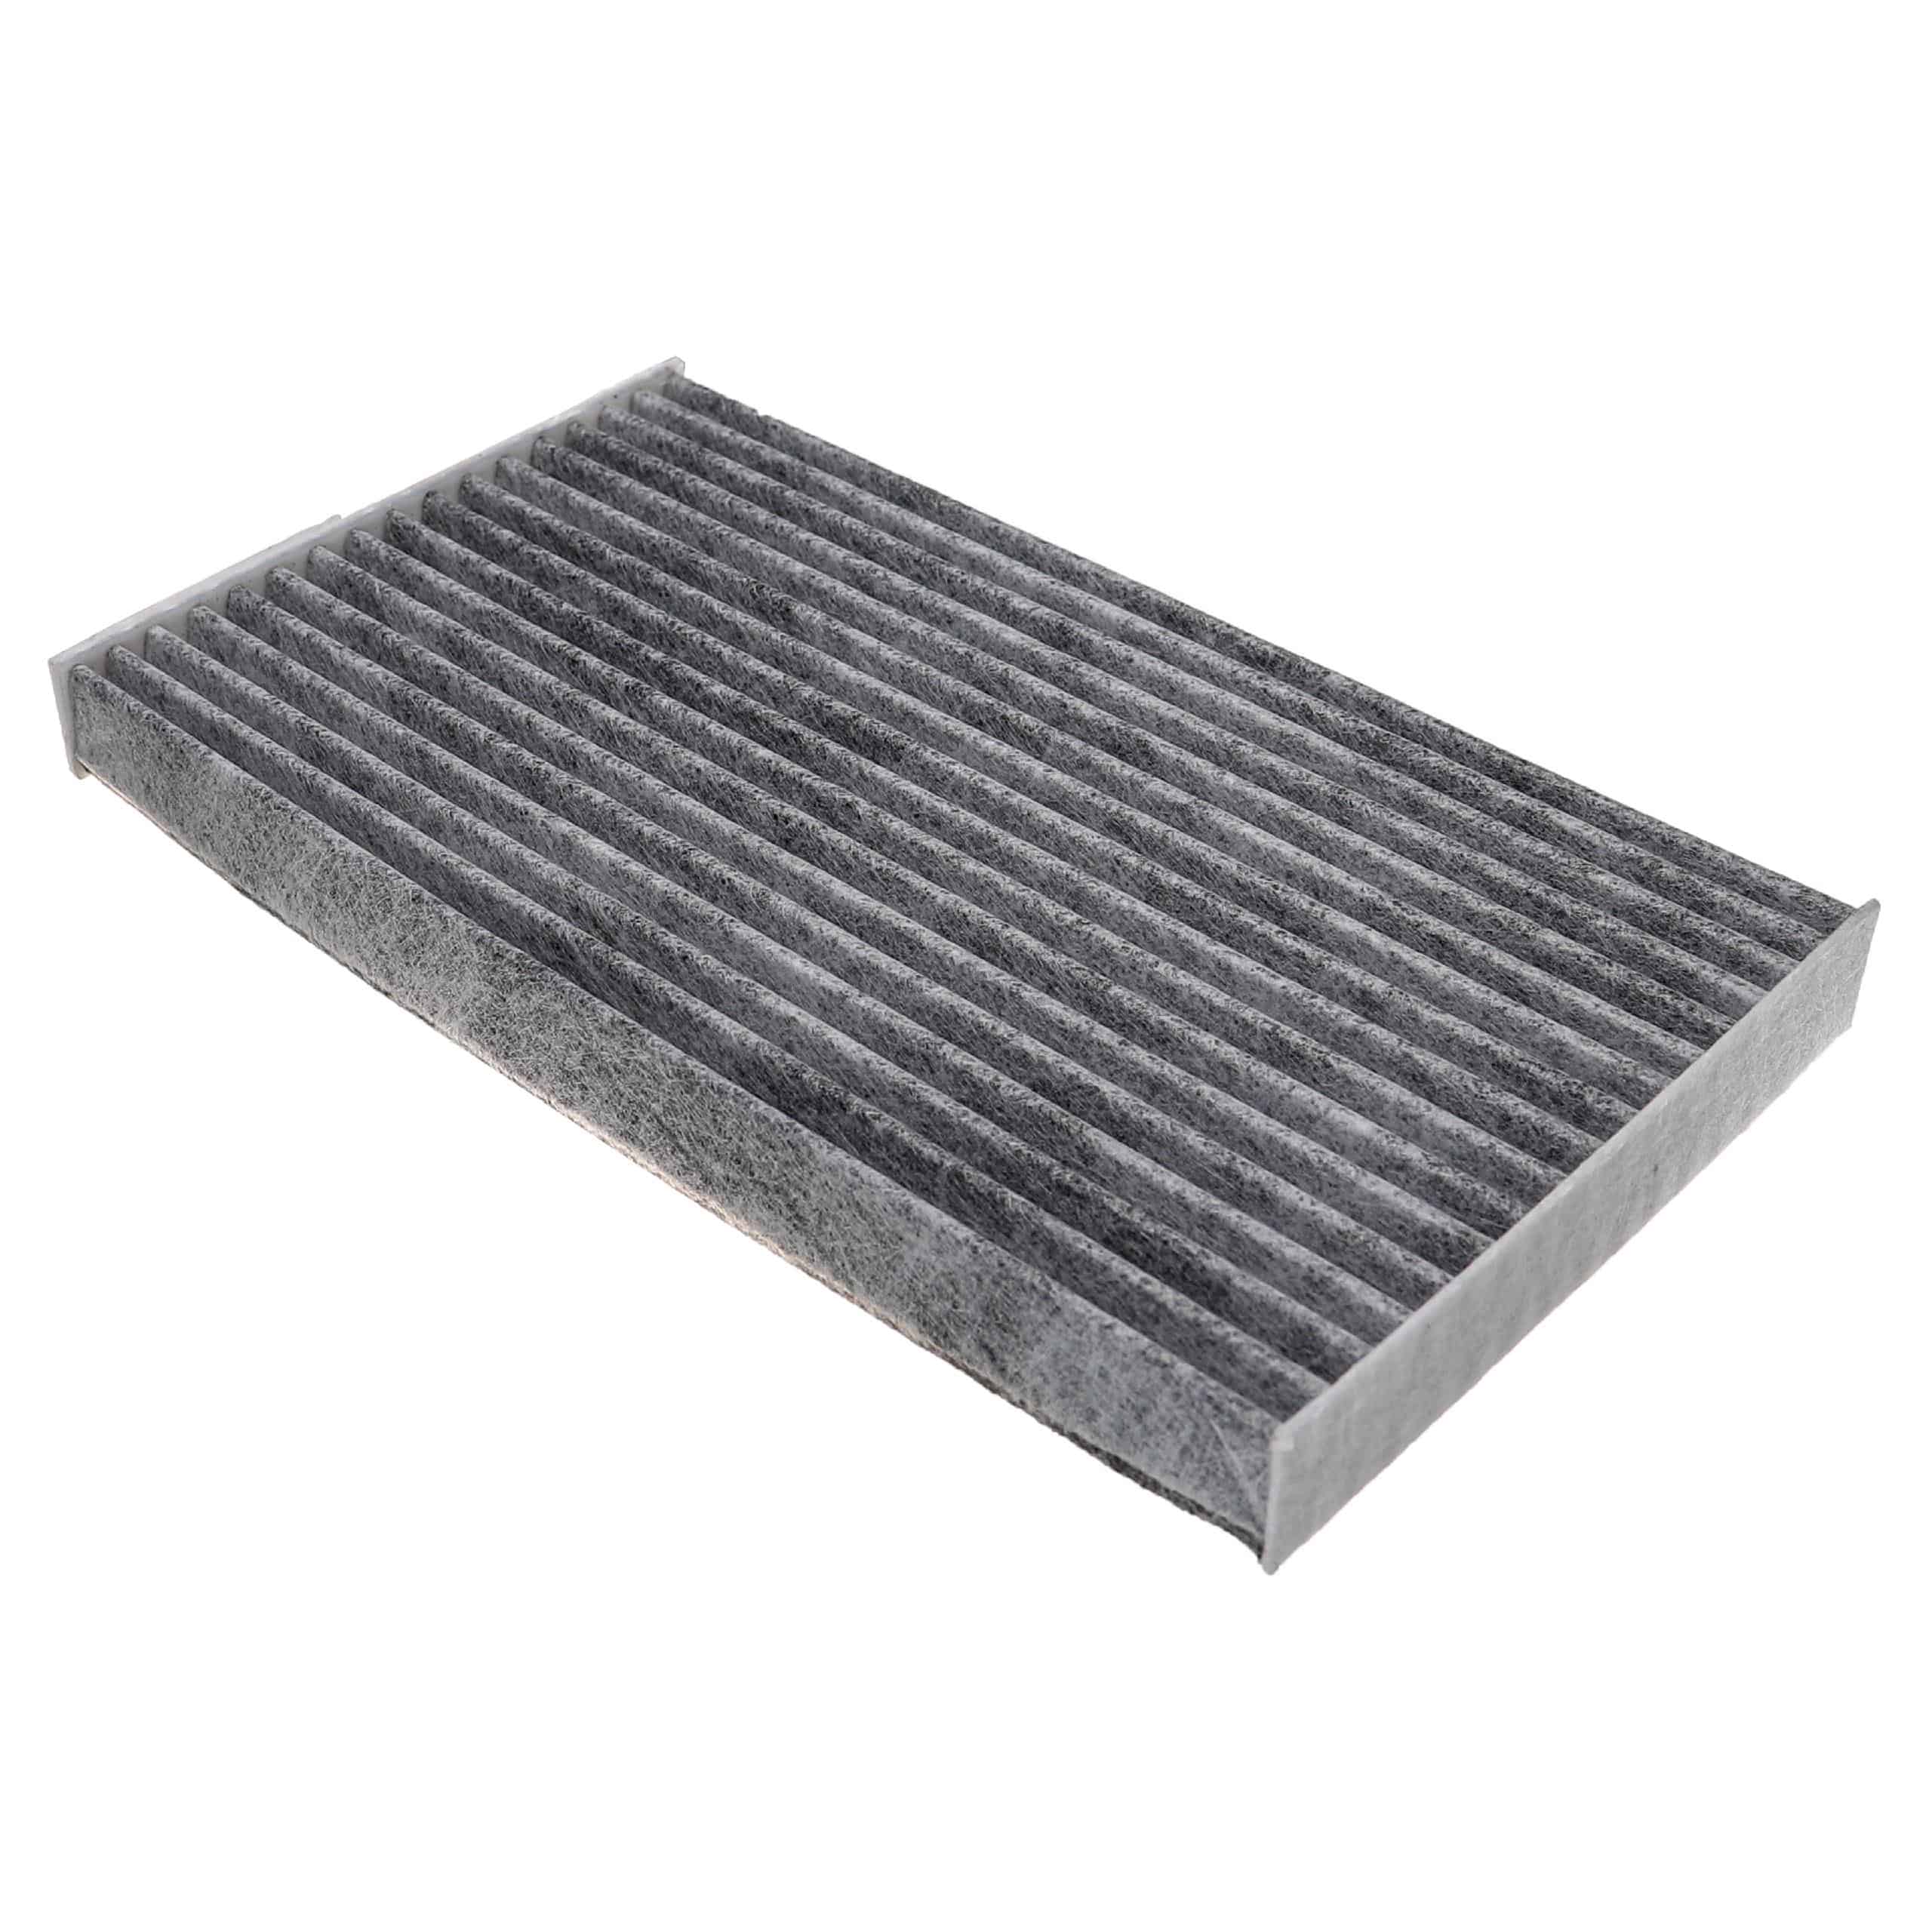 Cabin Air Filter replaces 1A First Automotive C30468 etc.